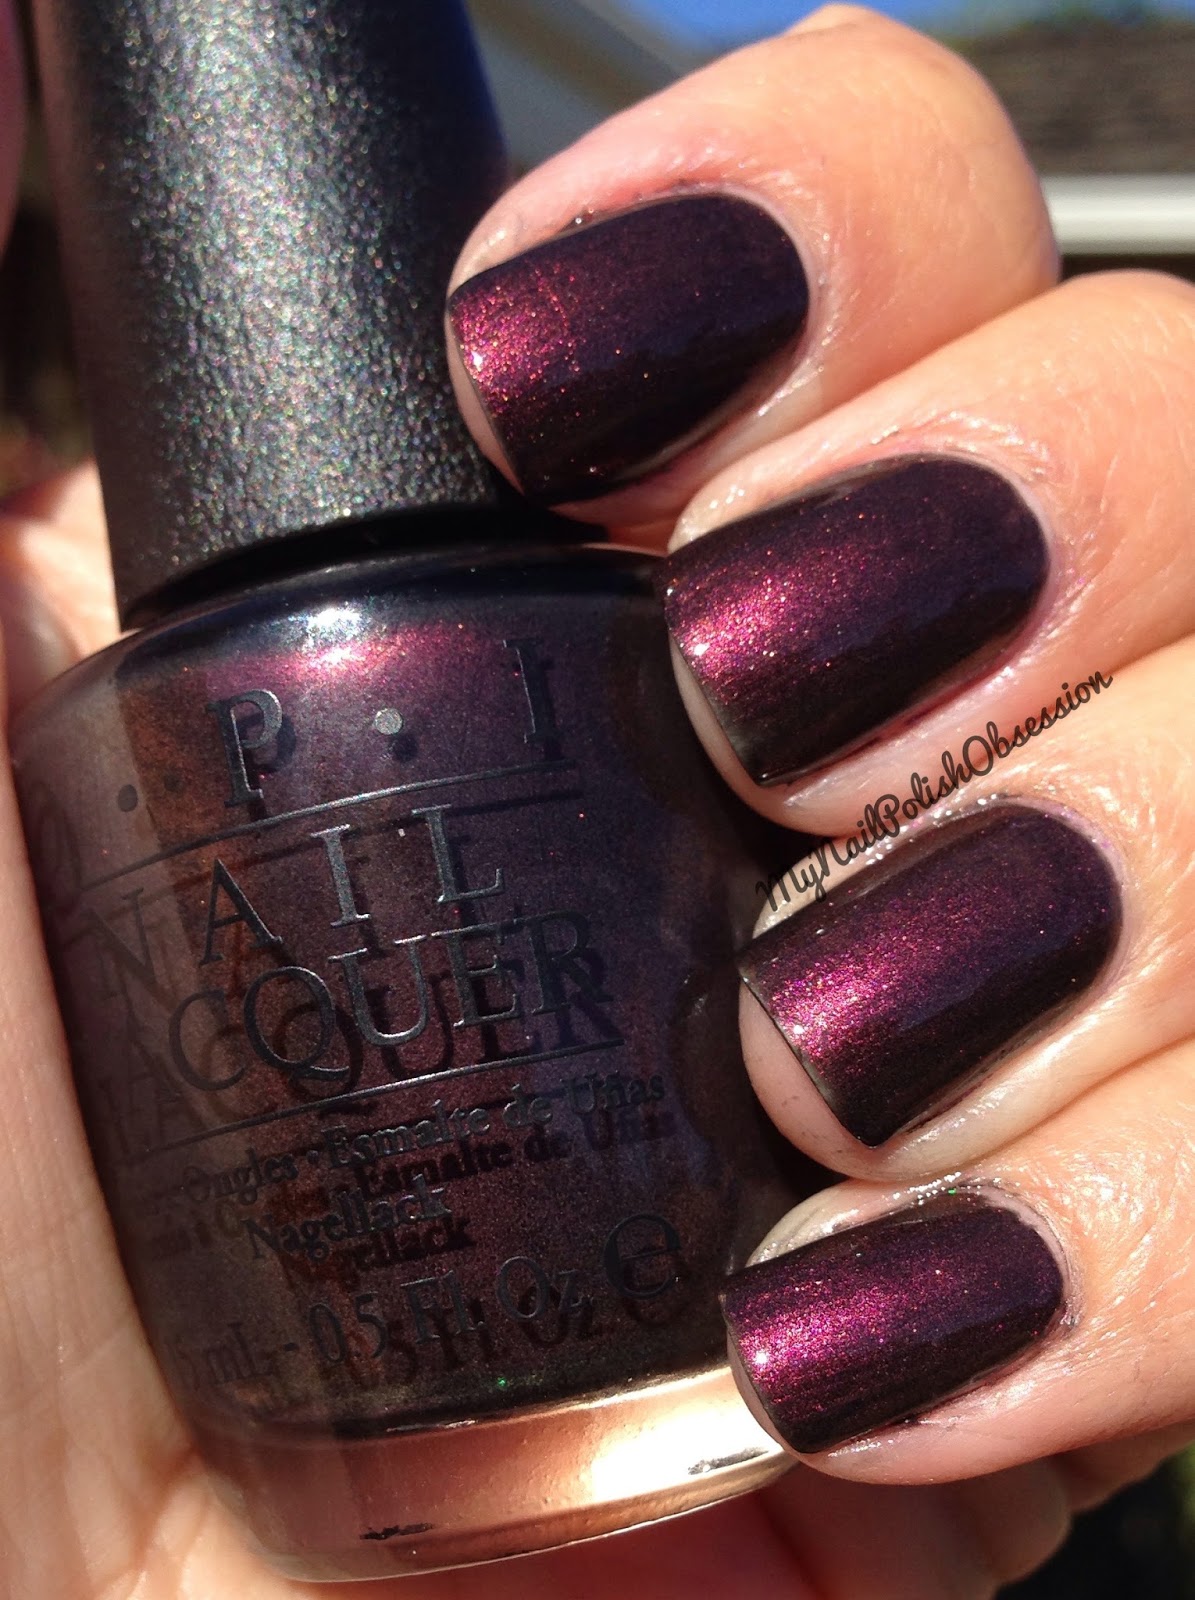 My Nail Polish Obsession: OPI Muir Muir On The Wall